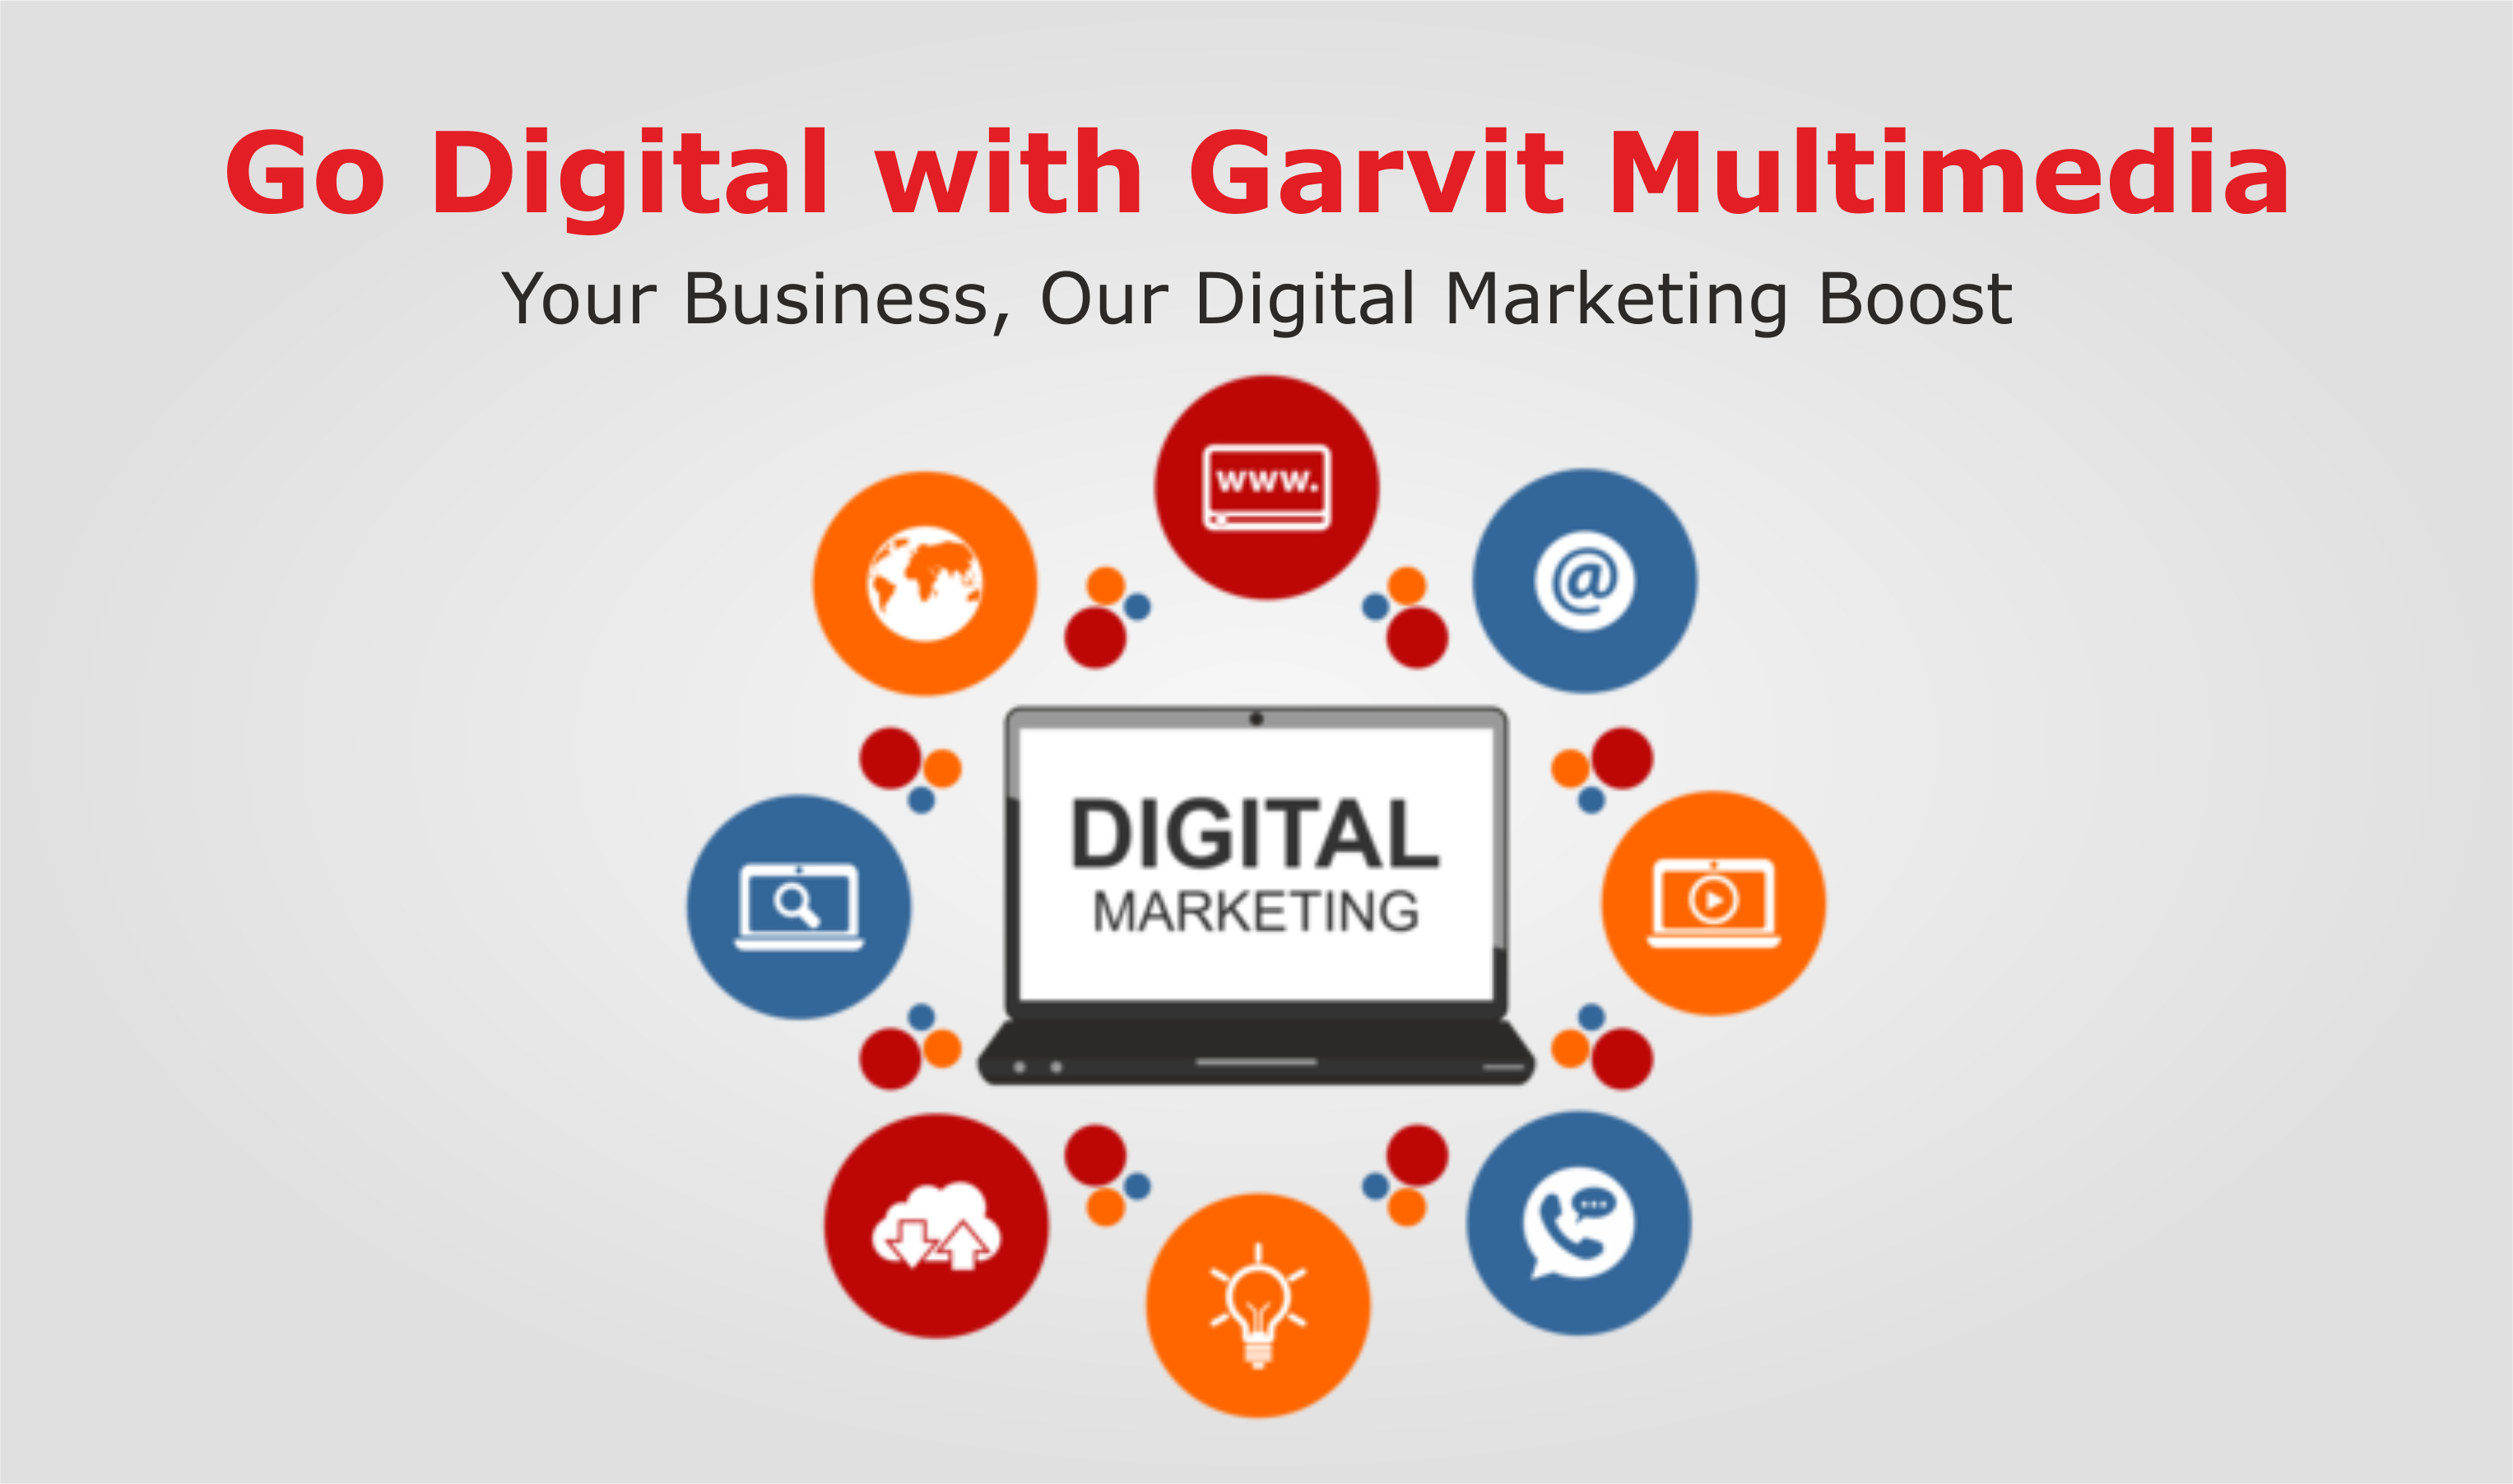 Go Digital with Garvit Multimedia: Your Business, Our Digital Marketing Boost